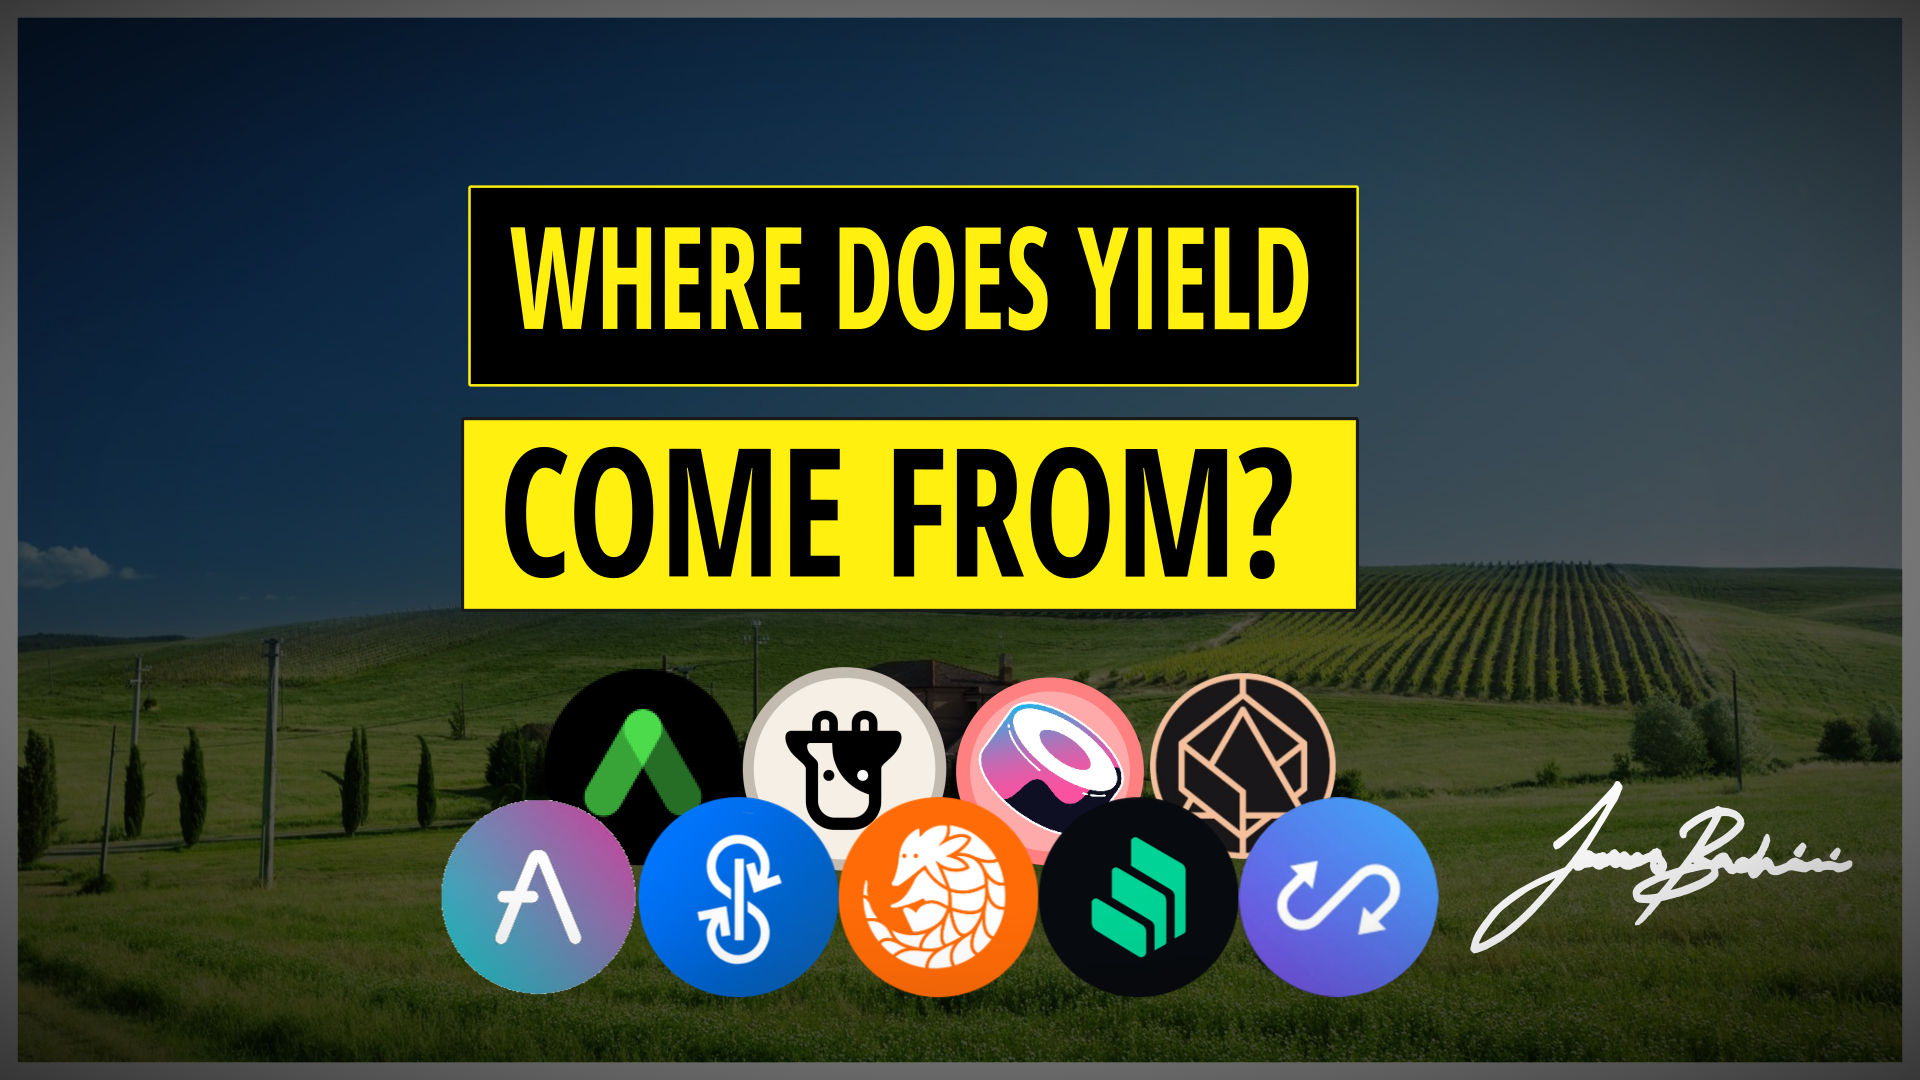 where does yield come from?